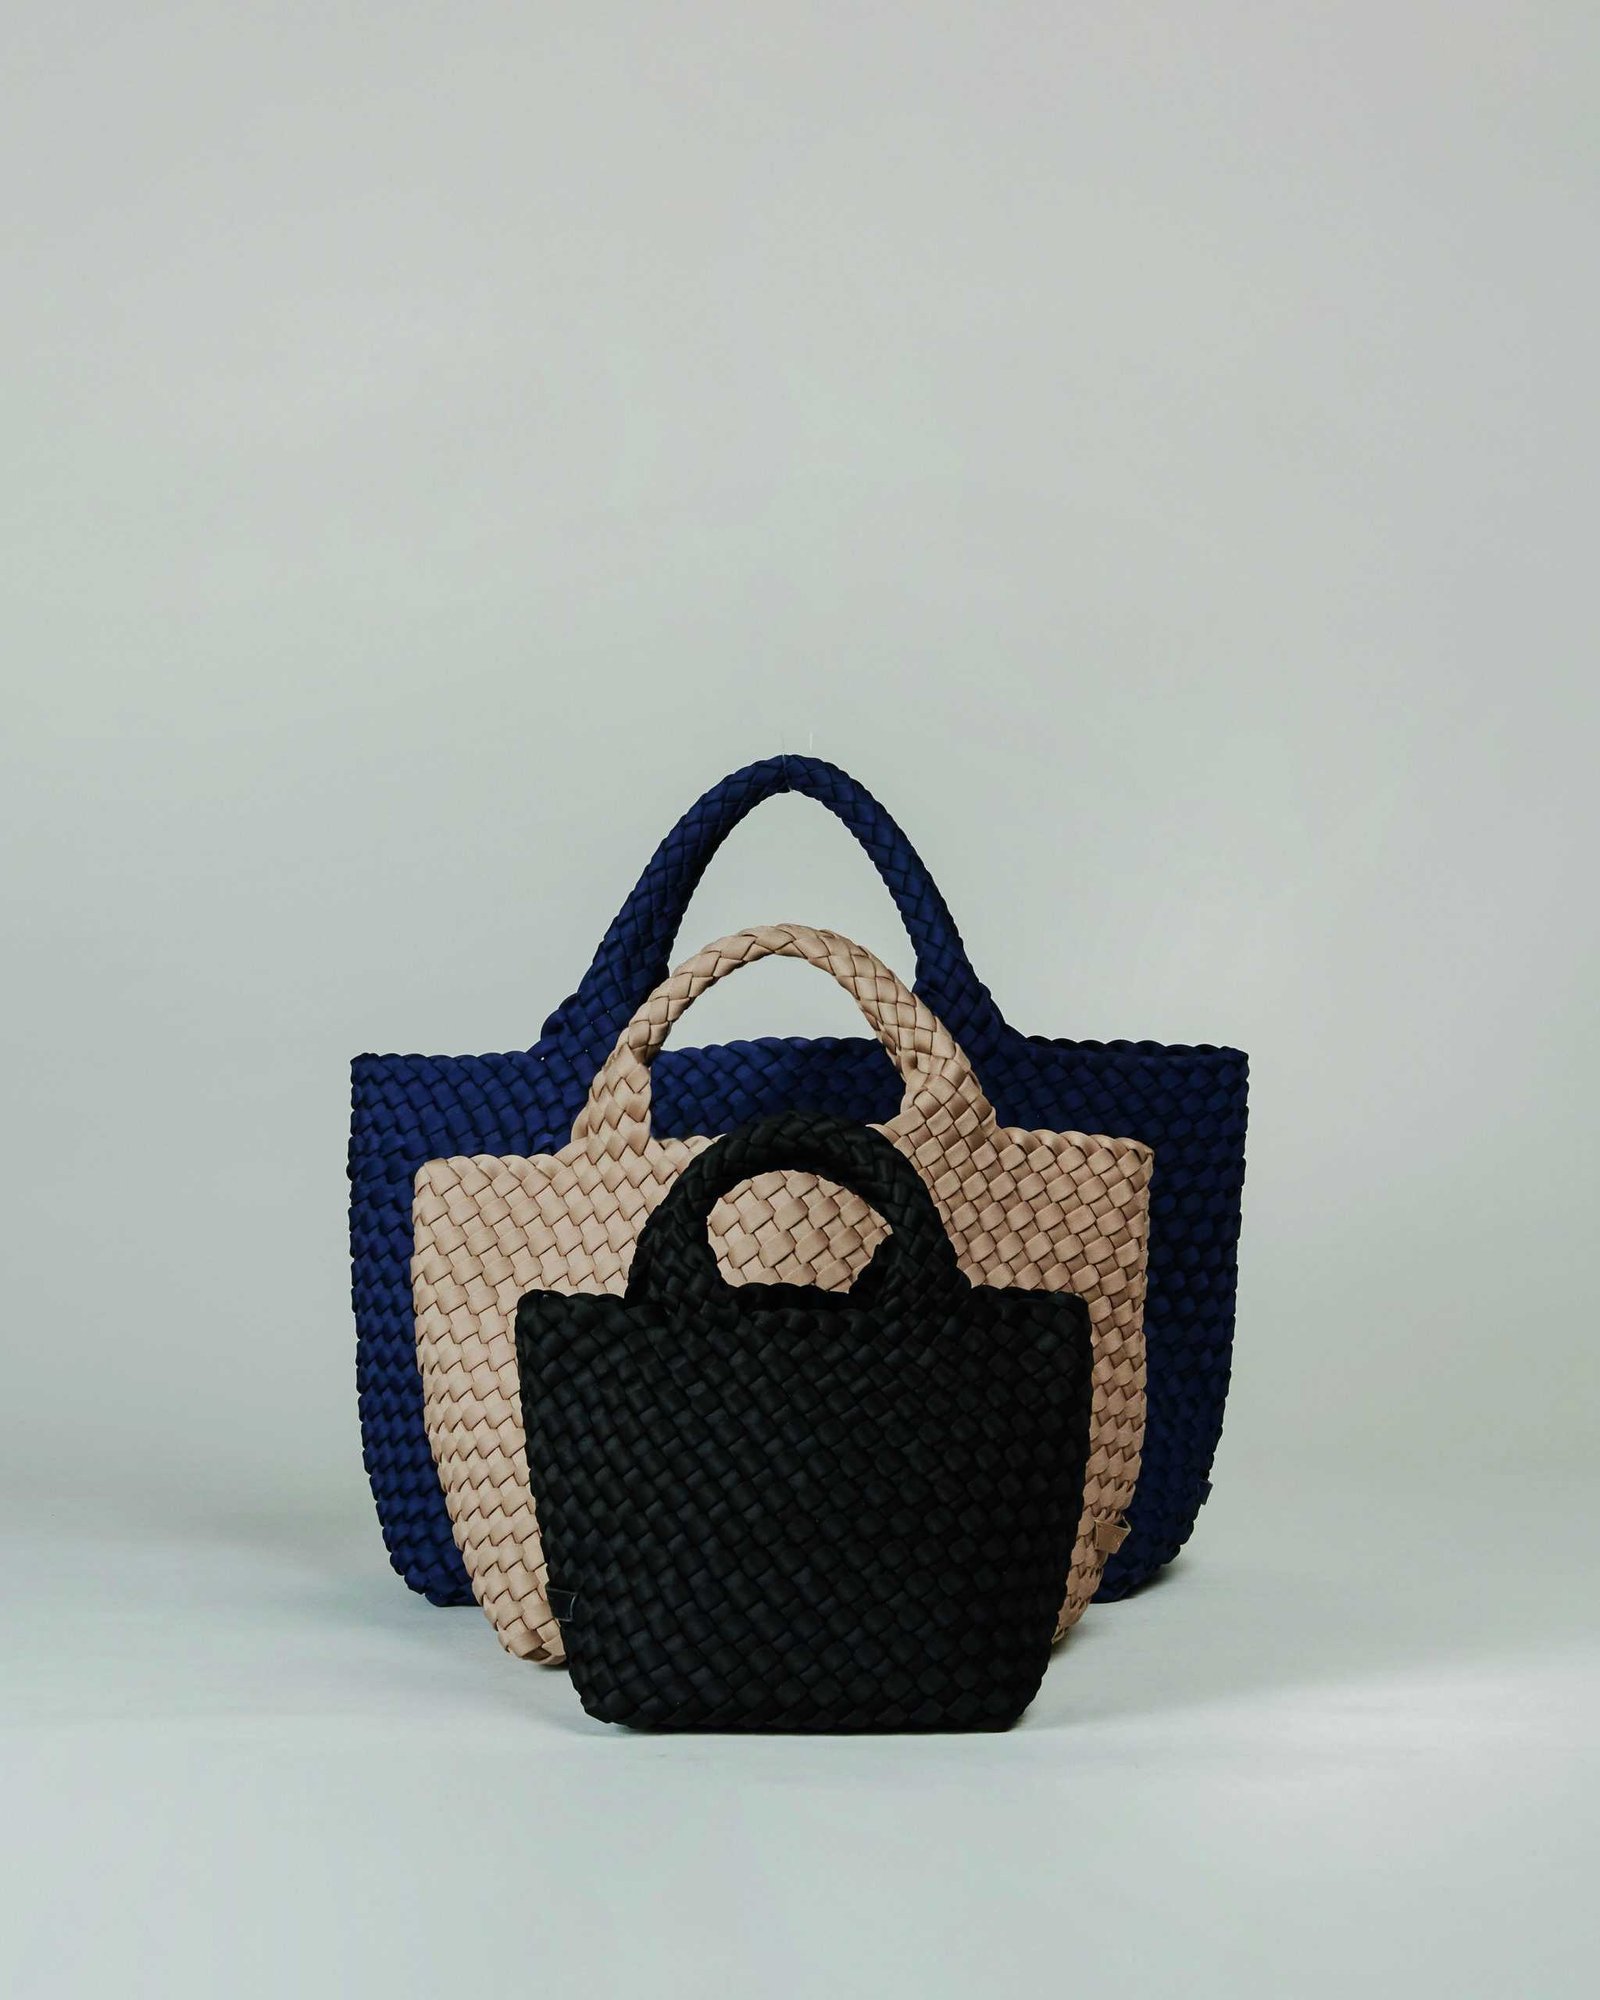 Three woven tote bags on a white background, perfect for eco-conscious individuals who want to minimize waste.